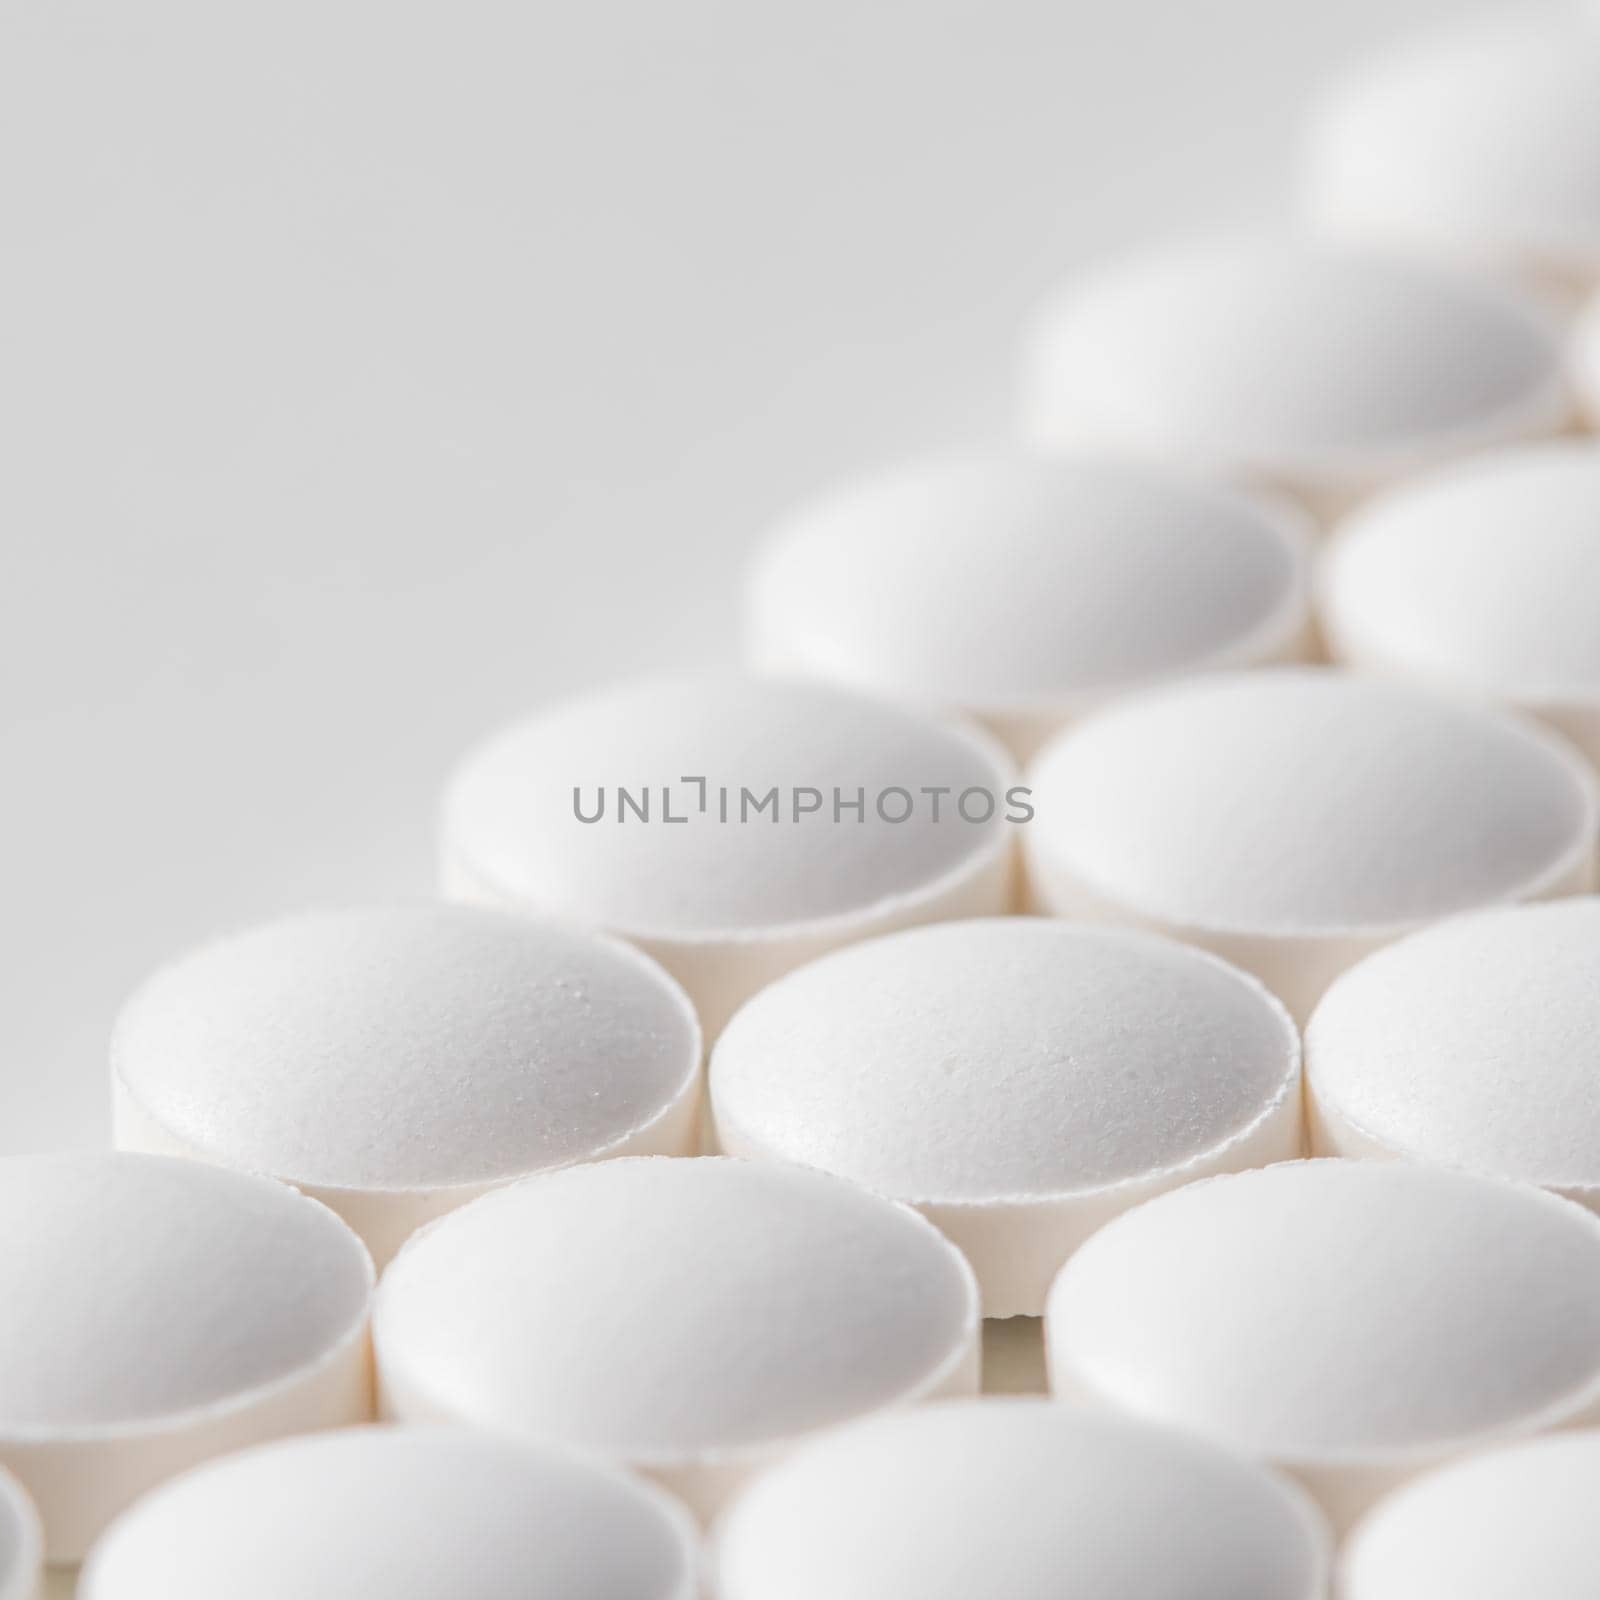 Rows of pills on a white background. Health care, medicine, pharmacy and disease concept